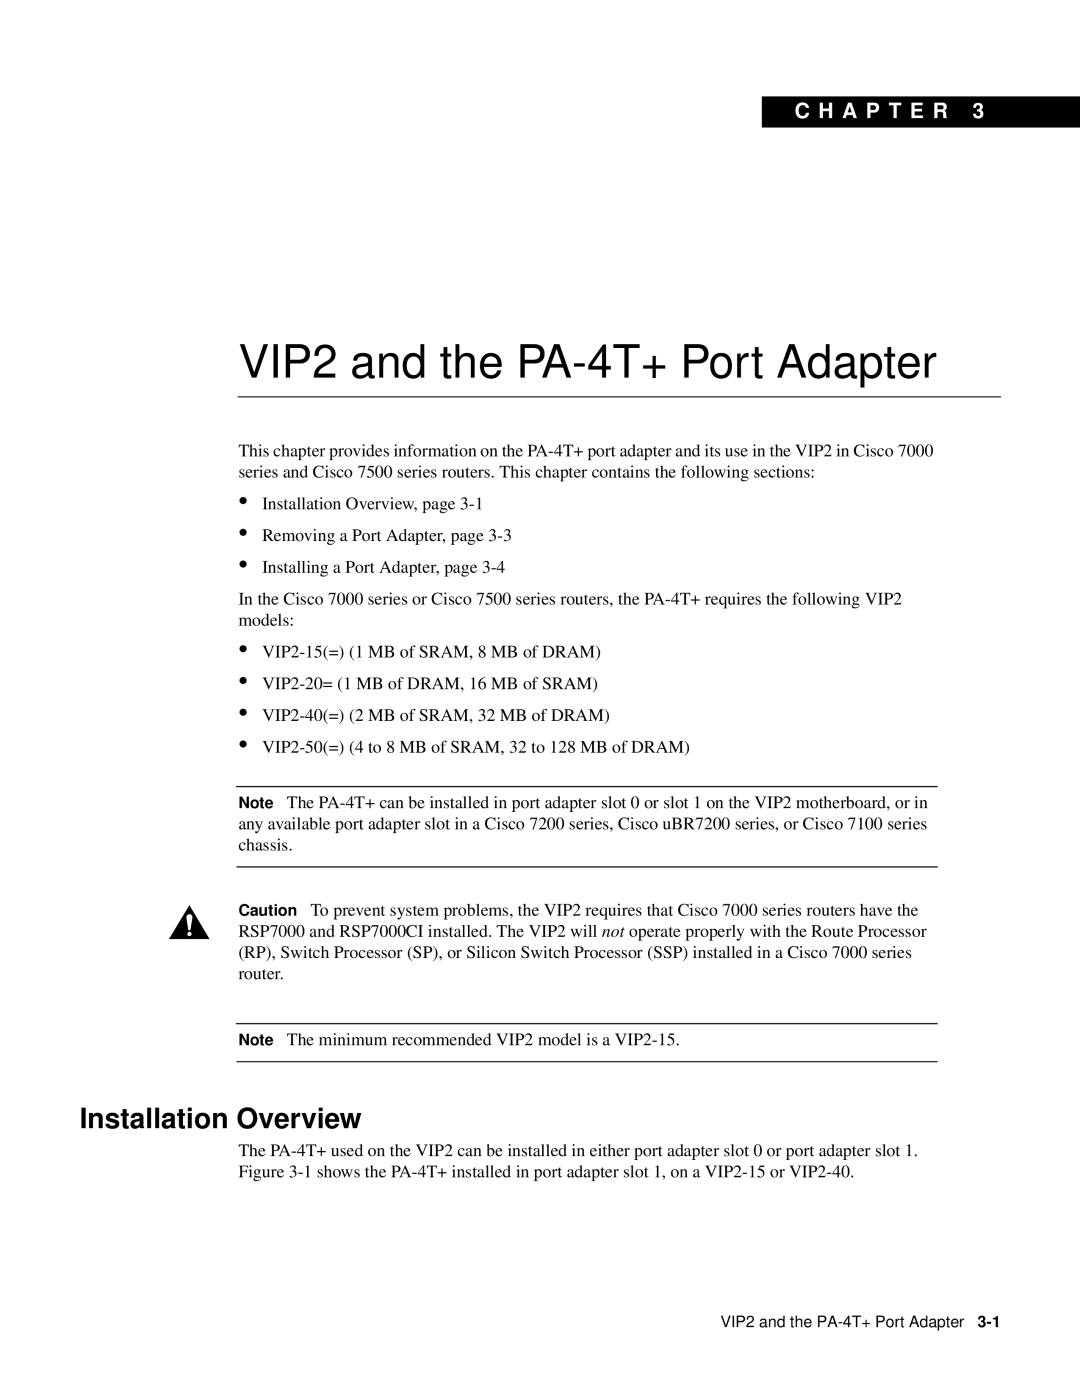 Cisco Systems manual VIP2 and the PA-4T+ Port Adapter, Installation Overview, C H A P T E R 